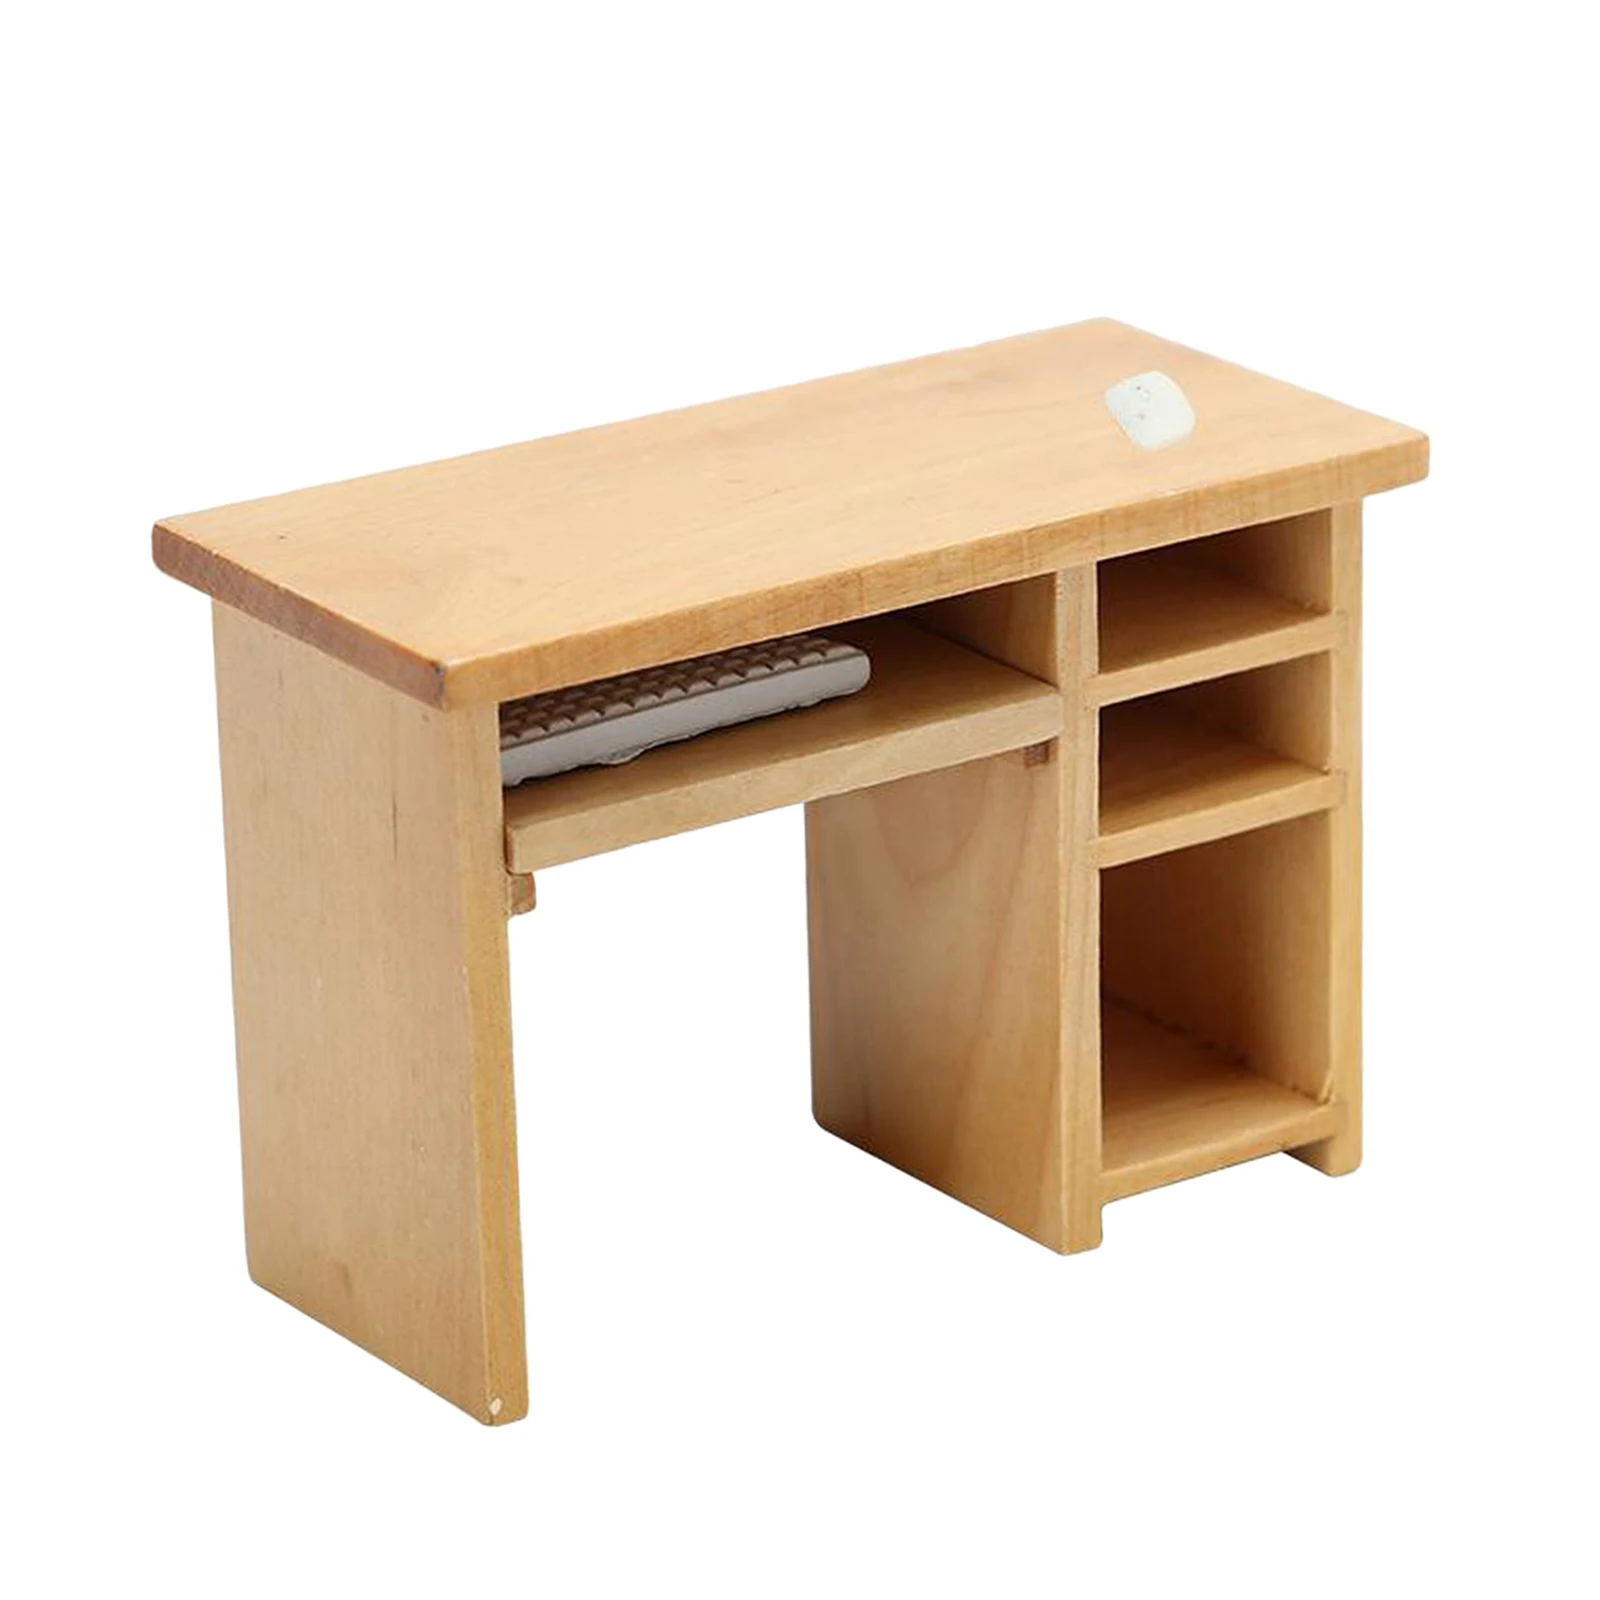 Cute Miniature Wooden Computer Desk with Mouse and Keyboard, 1:12 Scale Dollhouse Accessories Model